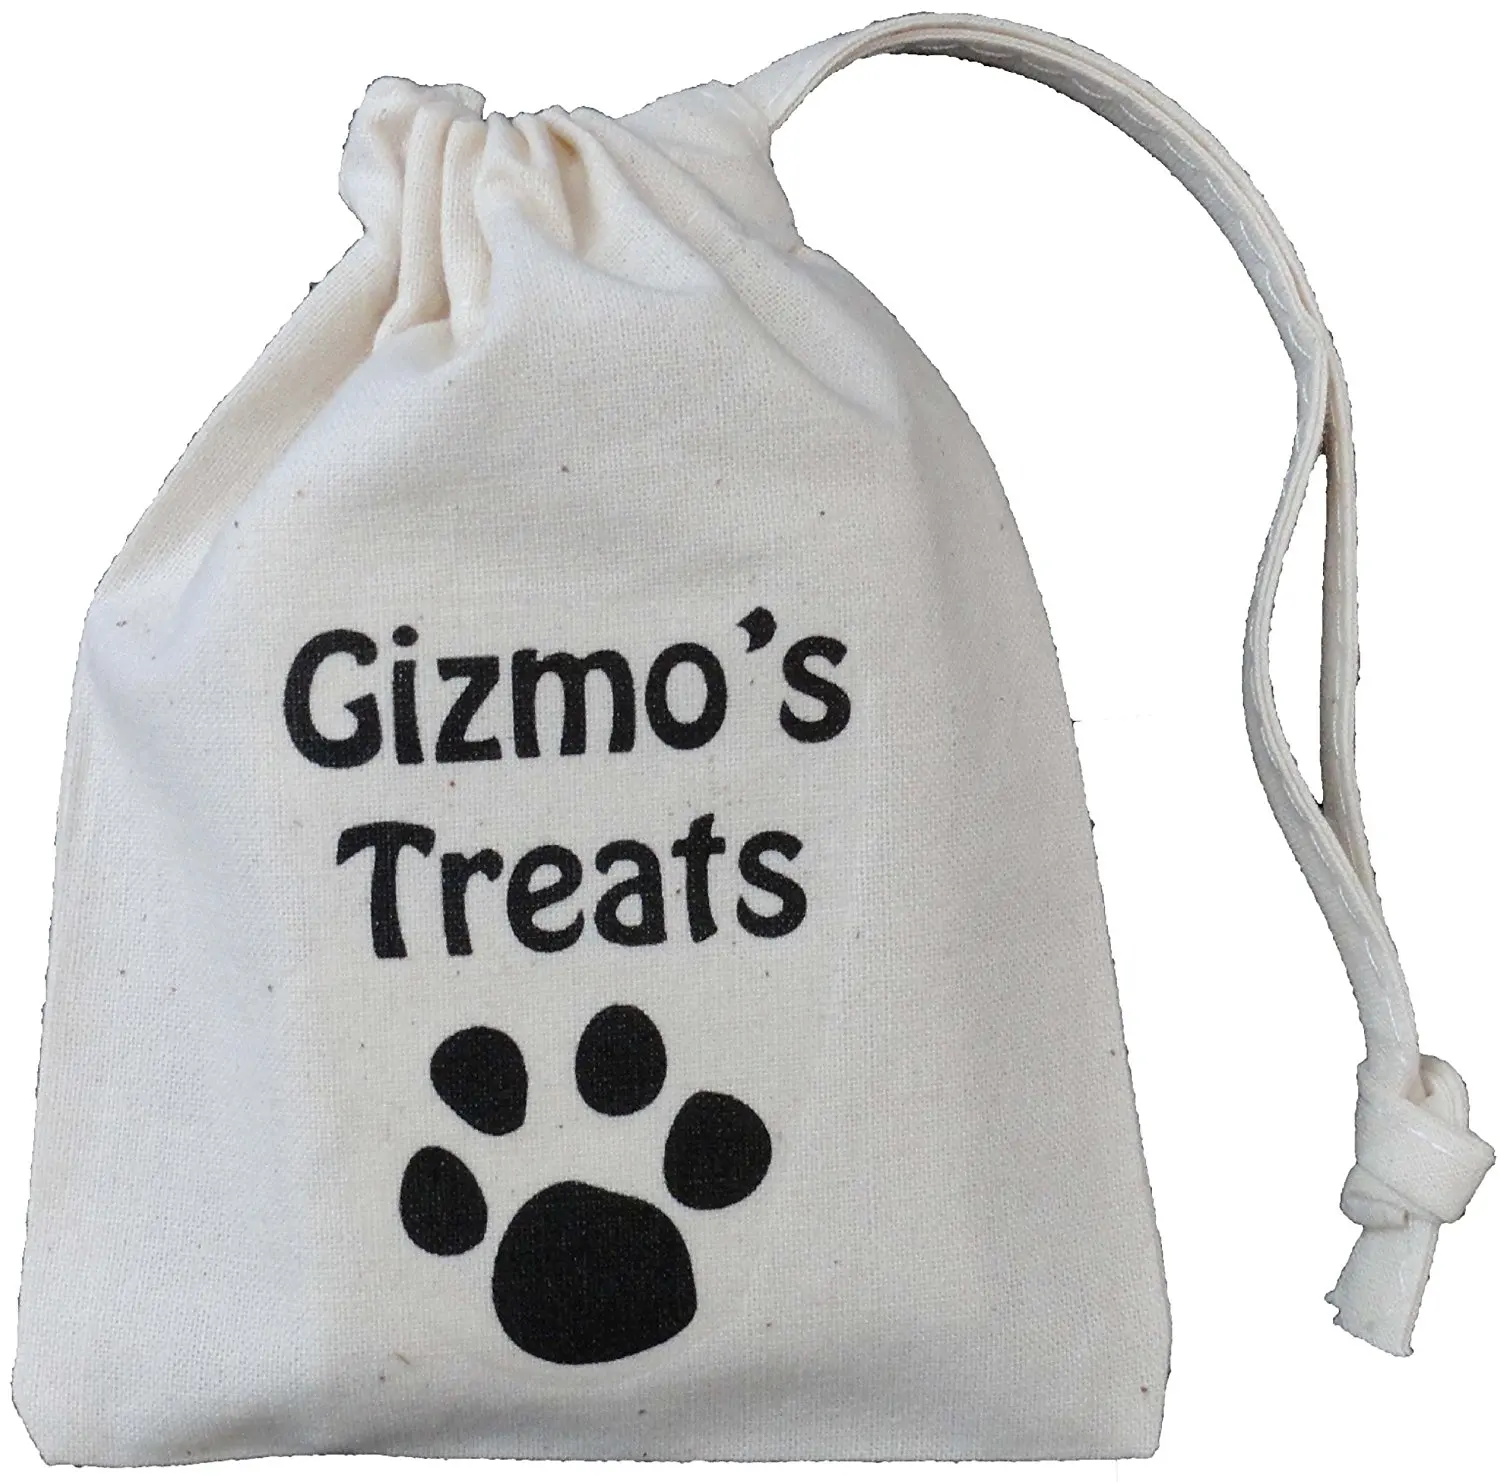 DOG TREAT BAG SMALL COTTON DRAWSTRING BAG Supplied empty PERSONALISED